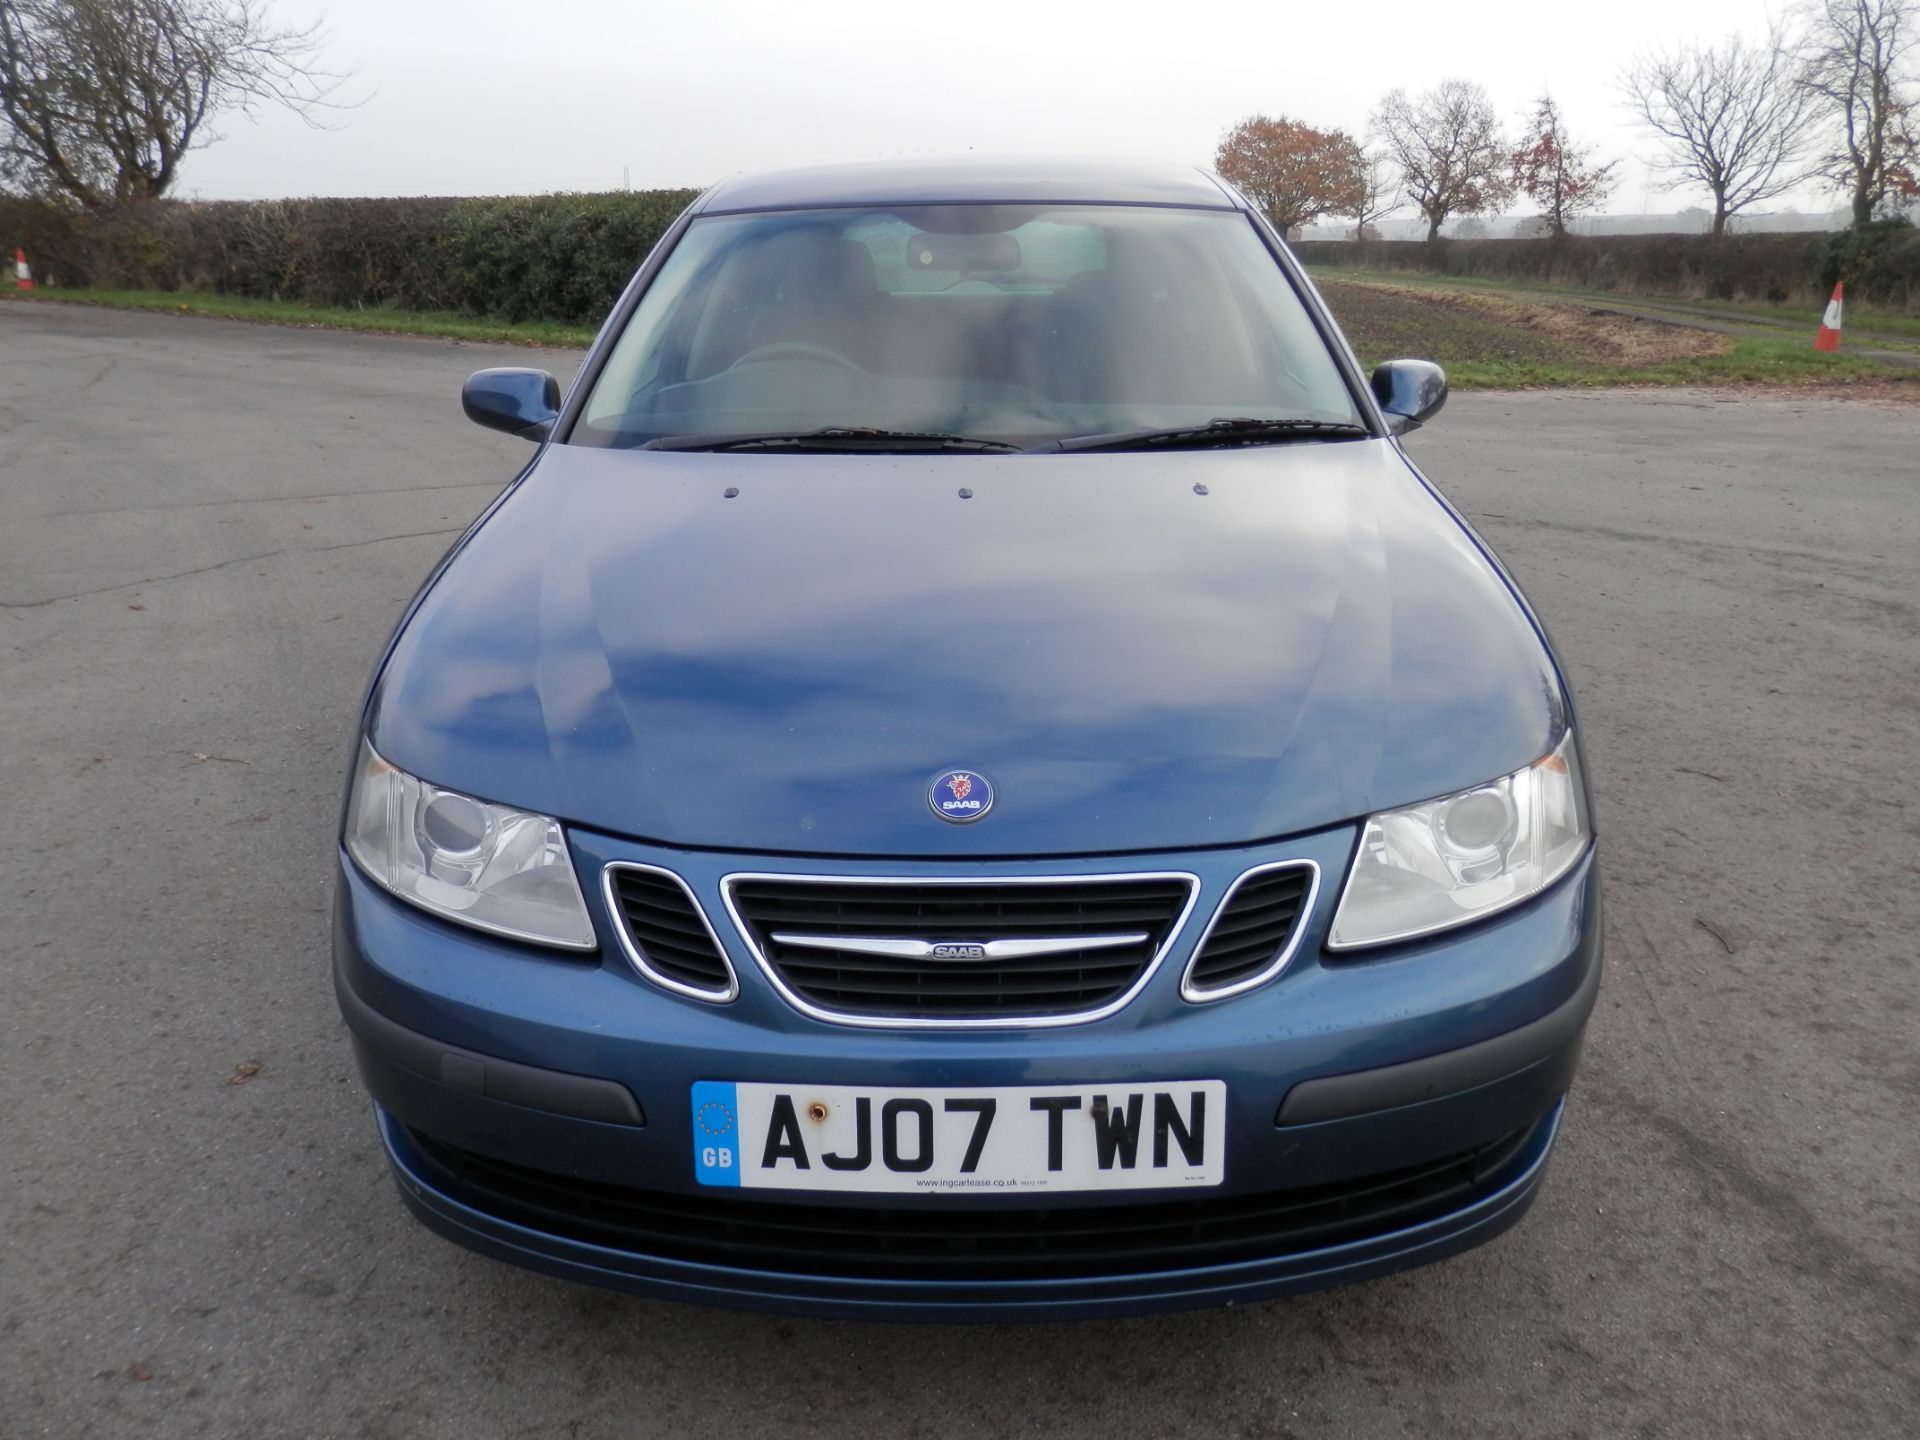 NOW WITH NO RESERVE !! 2007/07 SAAB 93 SPORTWAGON 1.9 TID 120 BHP, 6 SPEED MANUAL, MOT MARCH 2007. - Image 3 of 25